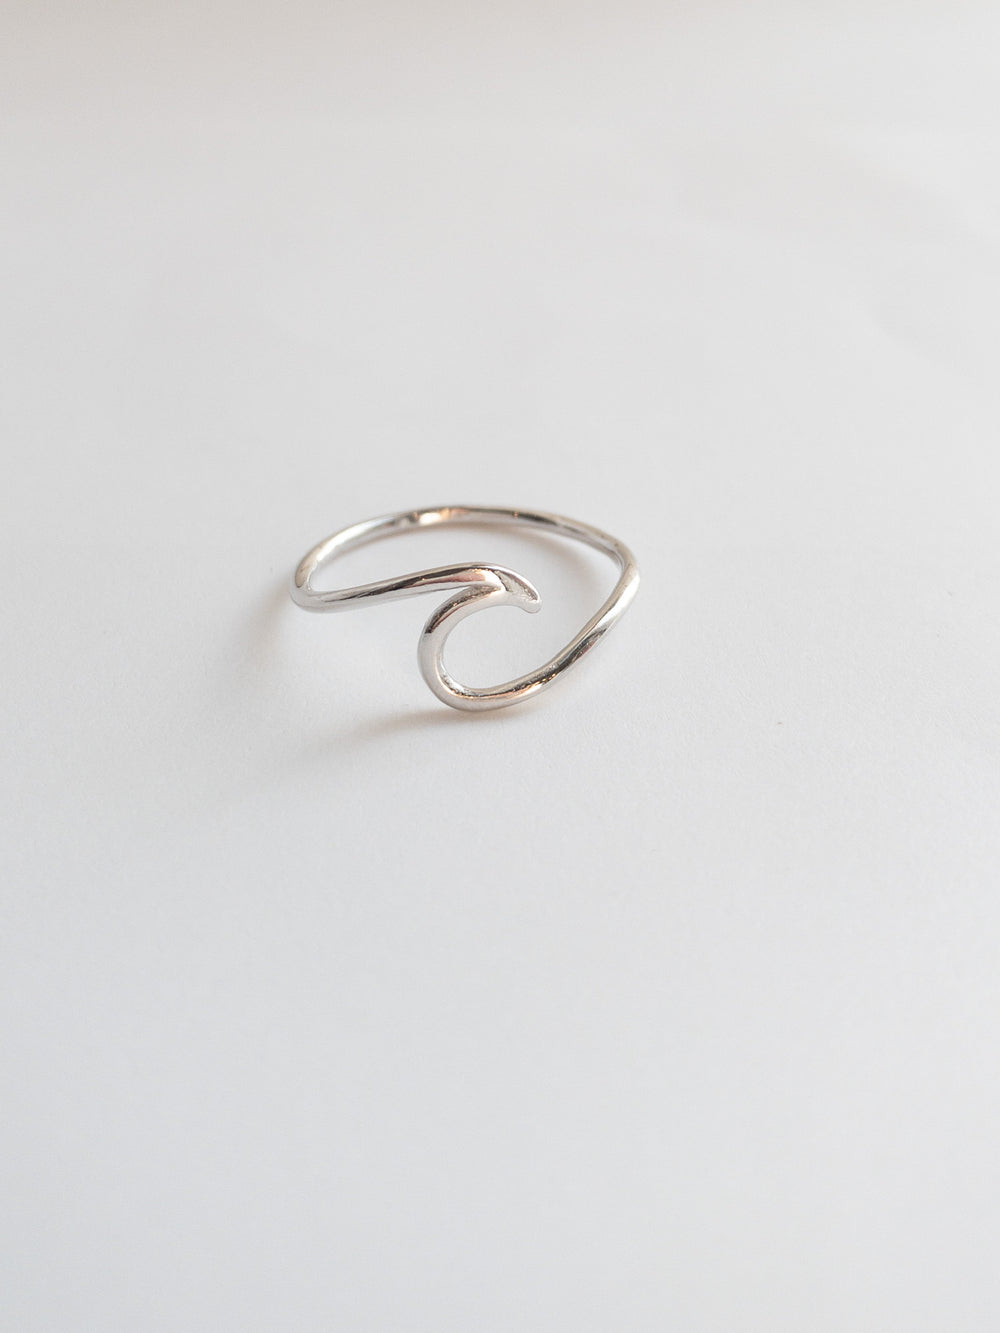 cresting wave ring- sterling silver 